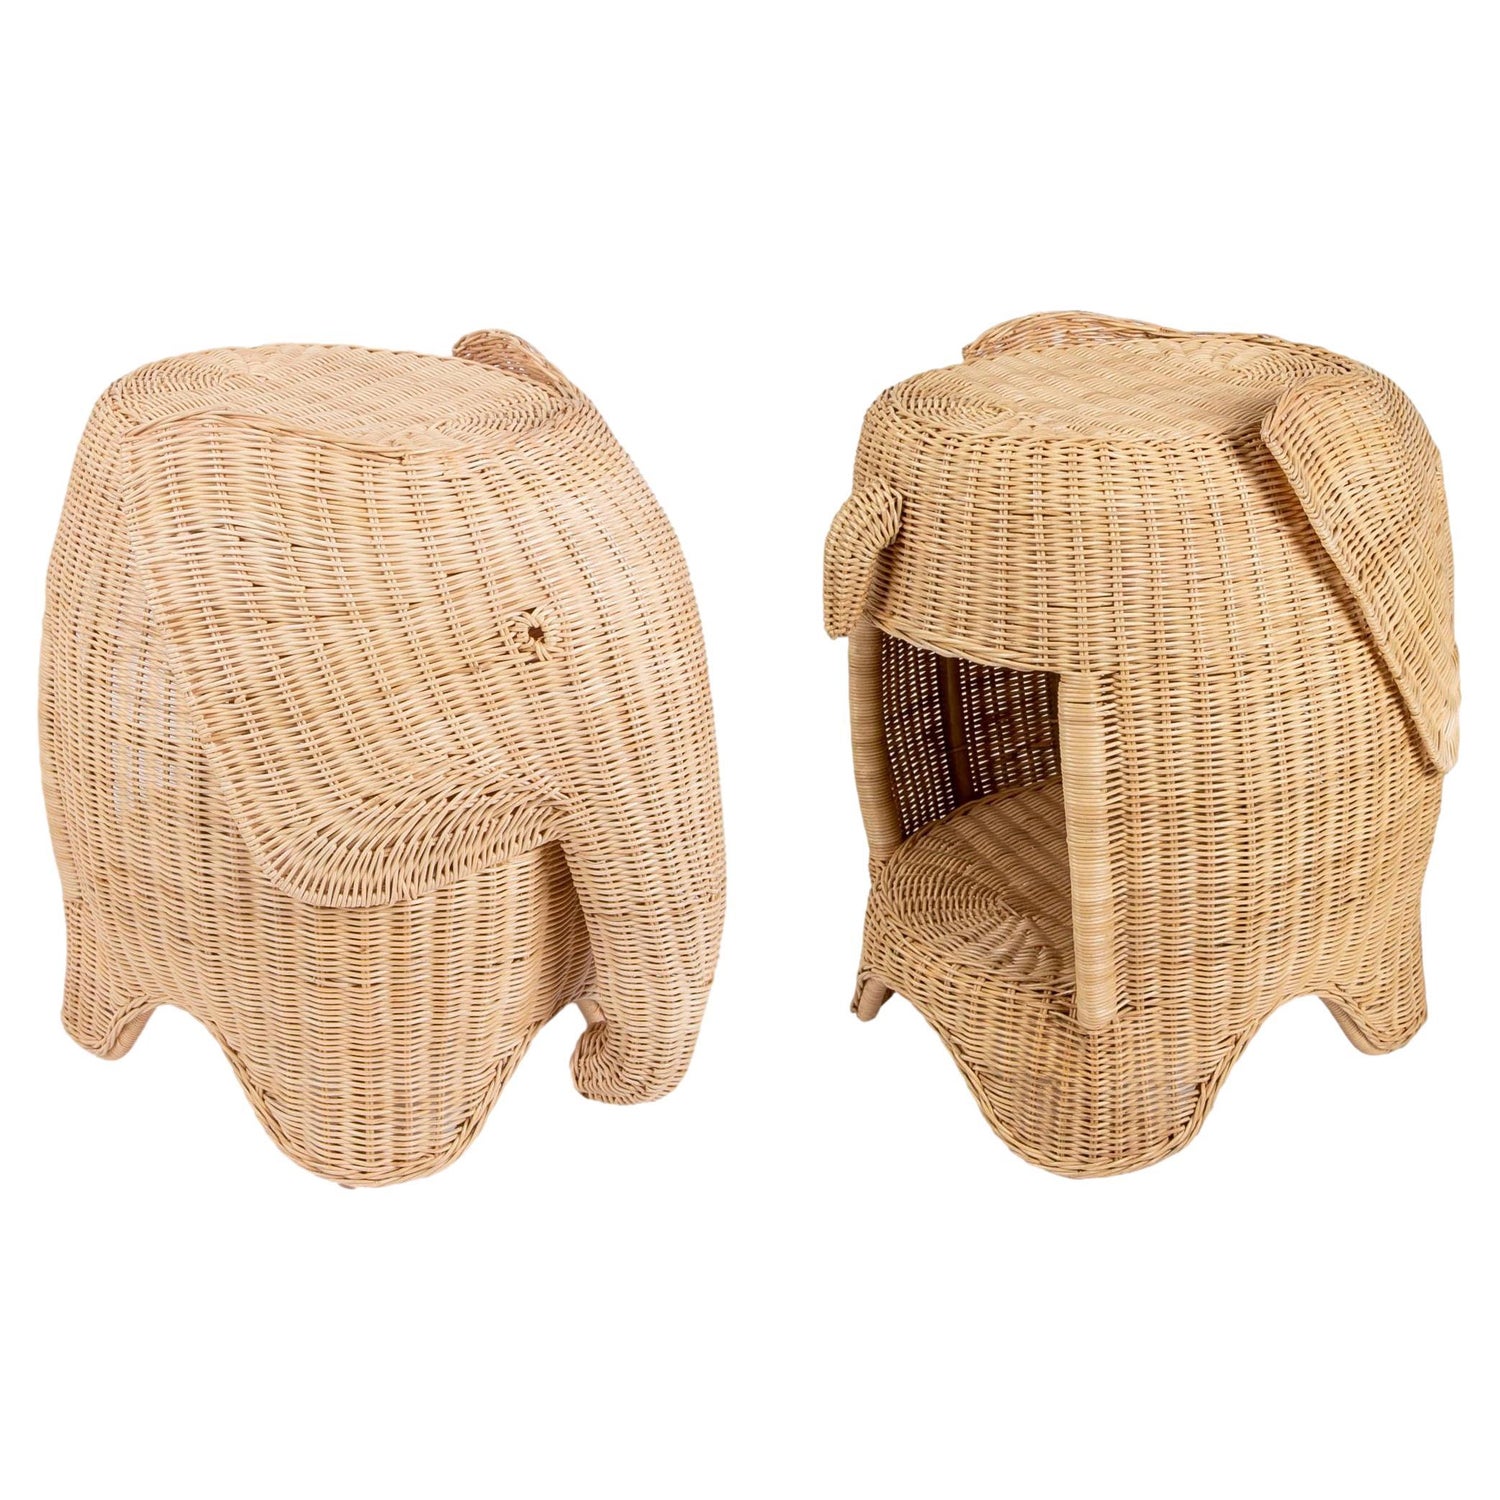 Pair of Side Tables in the Shape of Wicker Elephants For Sale at 1stDibs |  wicker elephant table